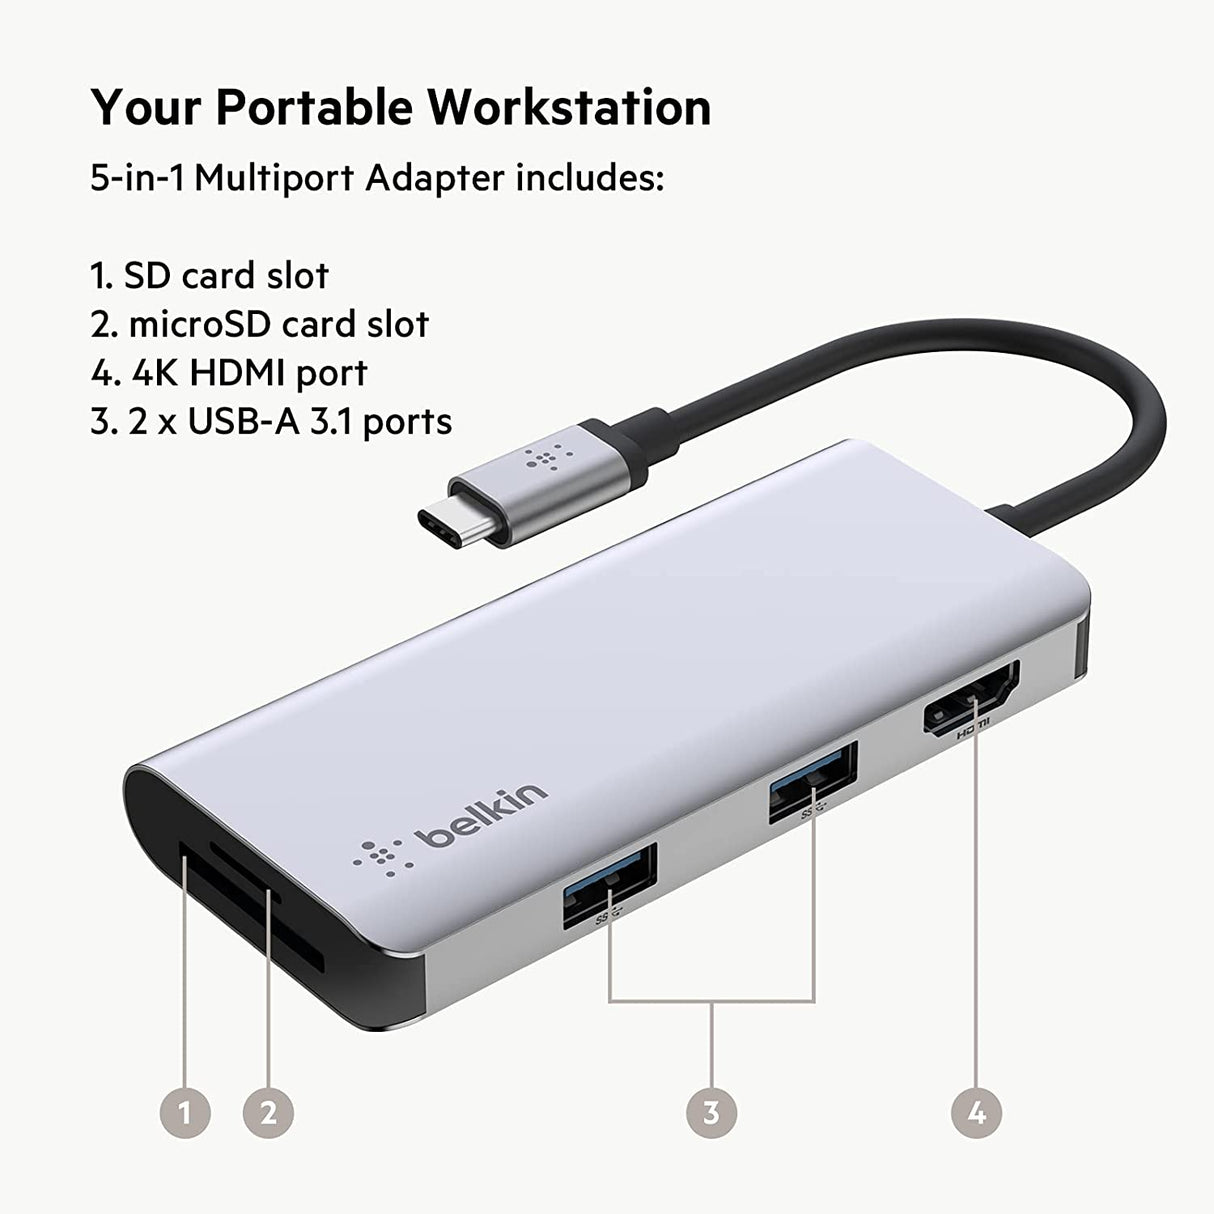  Belkin USB C Hub, 6-in-1 MultiPort Adapter Dock with 4K HDMI,  USB-C 100W PD Pass-Through Charging, 2 x USB A, Gigabit Ethernet Ports and  SD Slot for MacBook Pro, Air, iPad